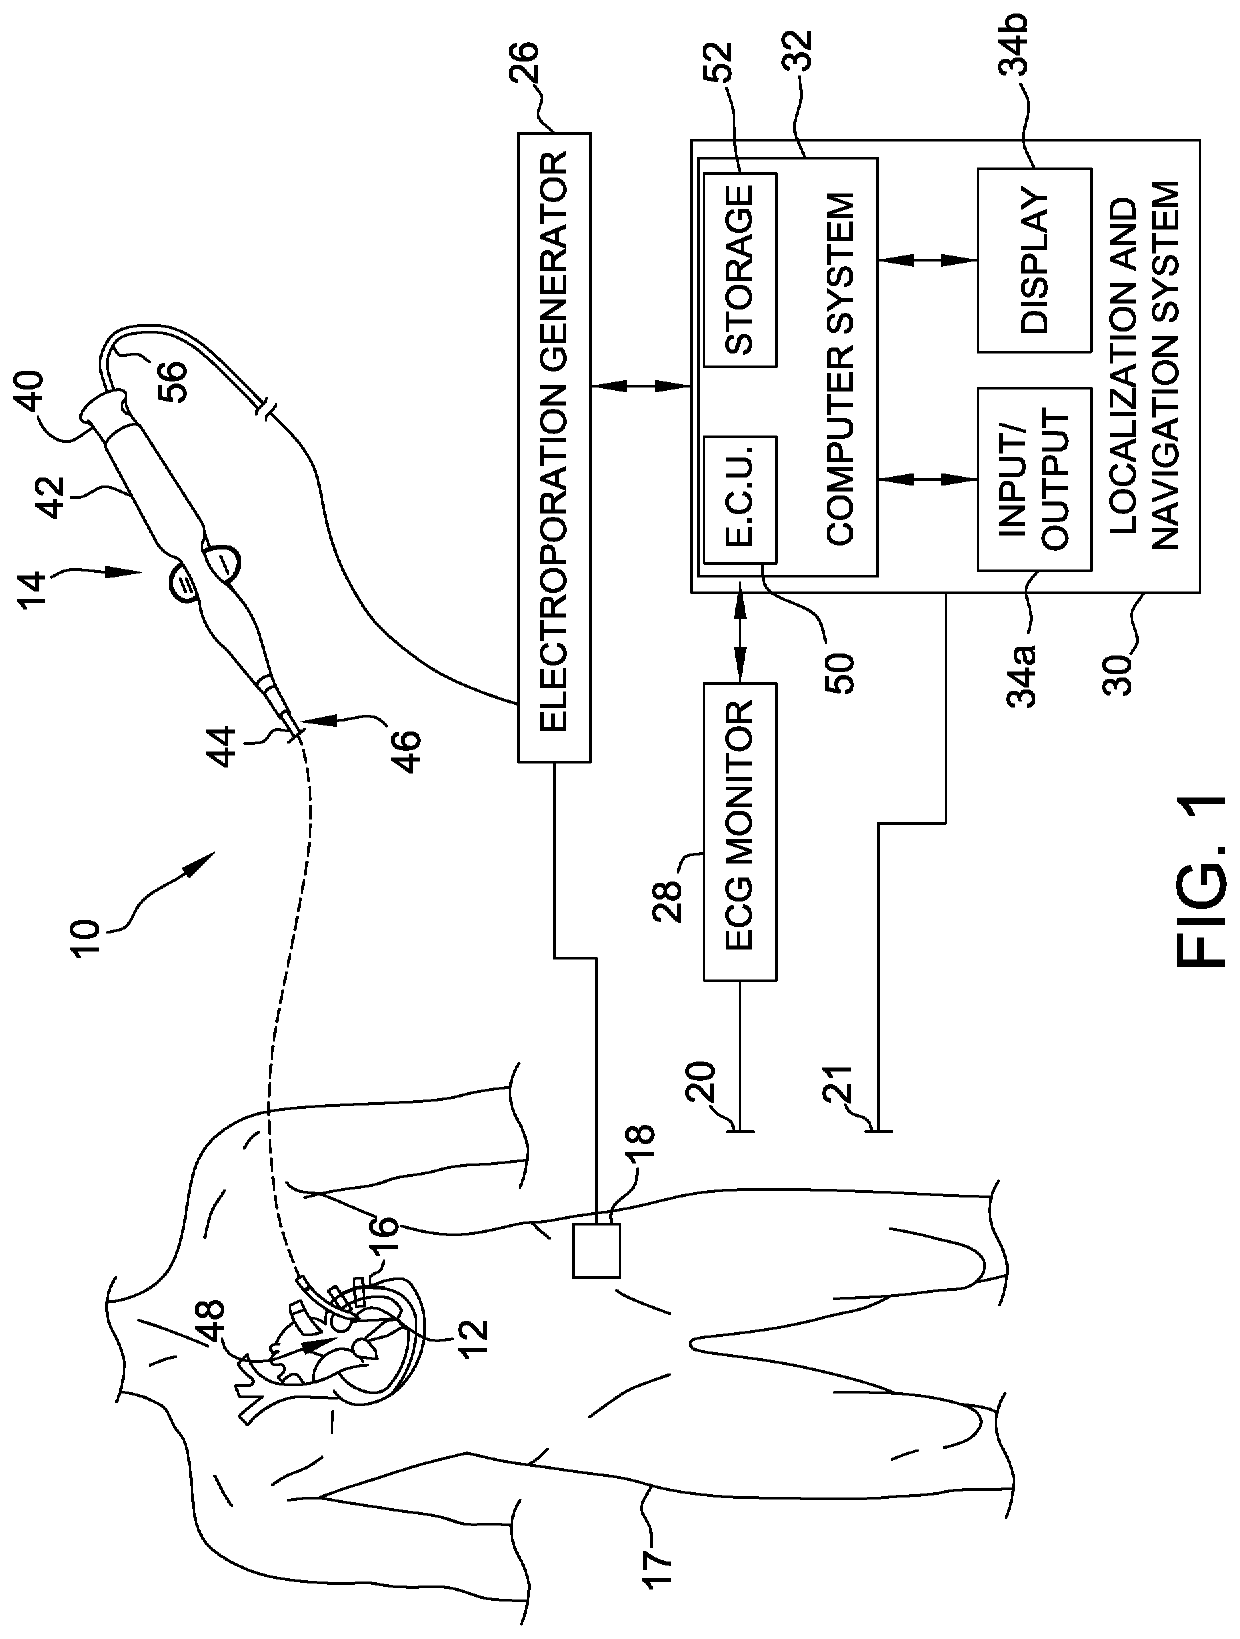 Electroporation system and method of preconditioning tissue for electroporation therapy